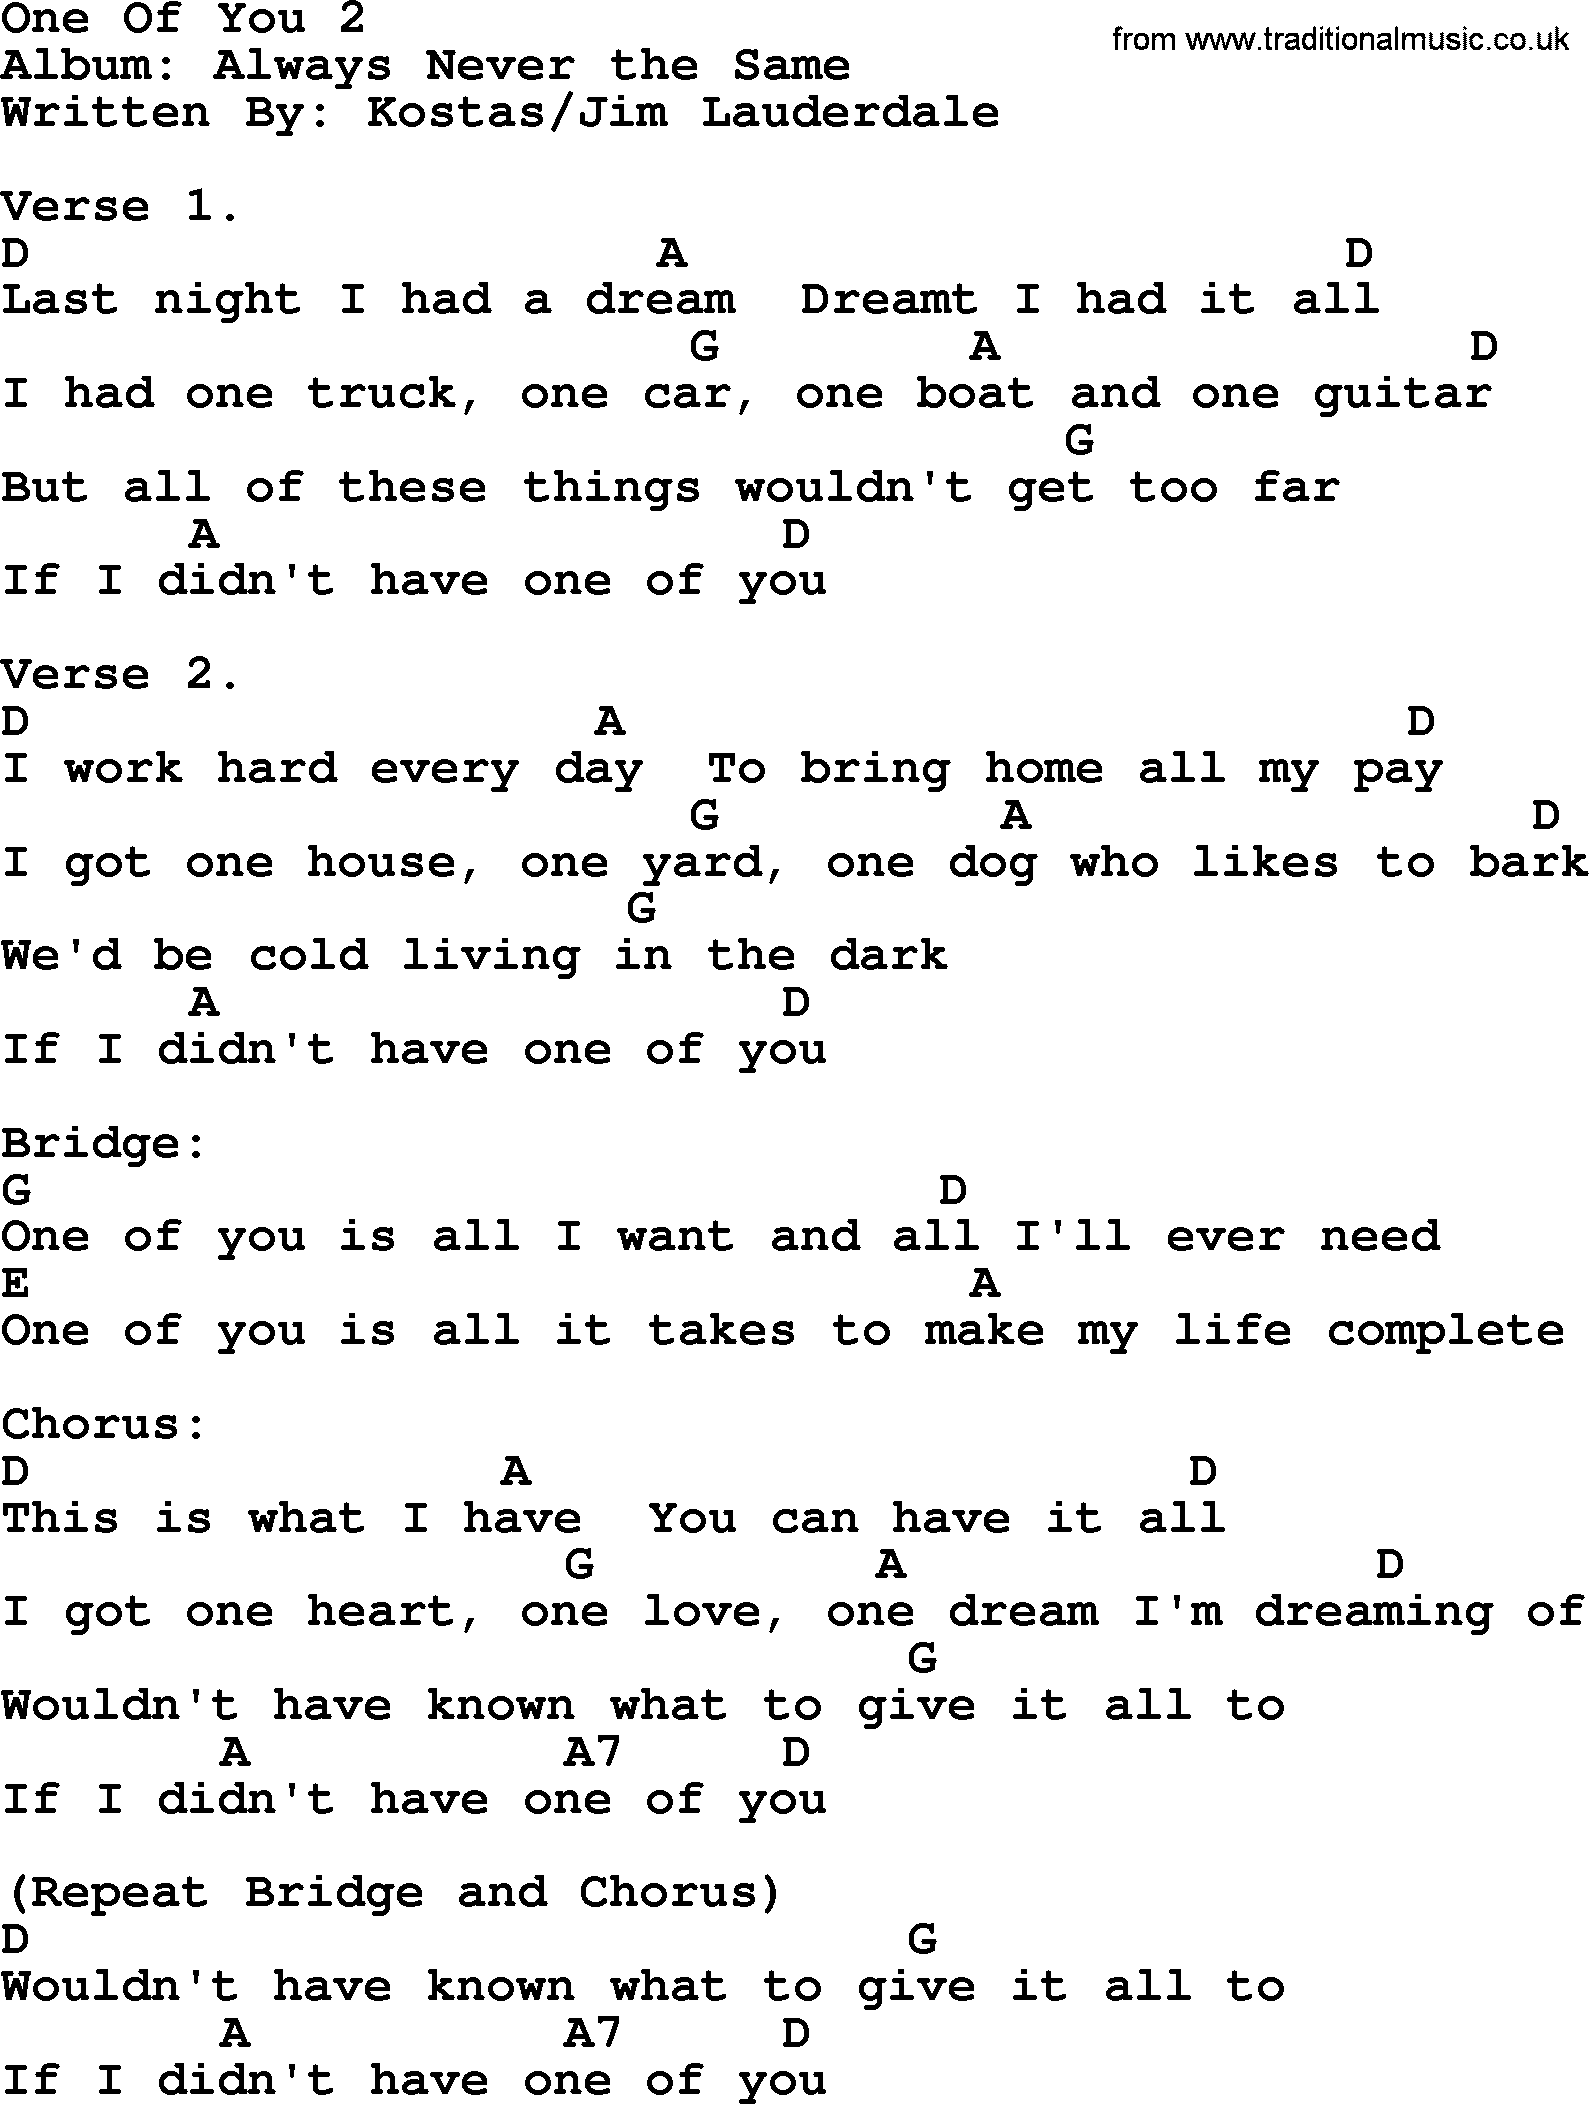 George Strait song: One Of You 2, lyrics and chords